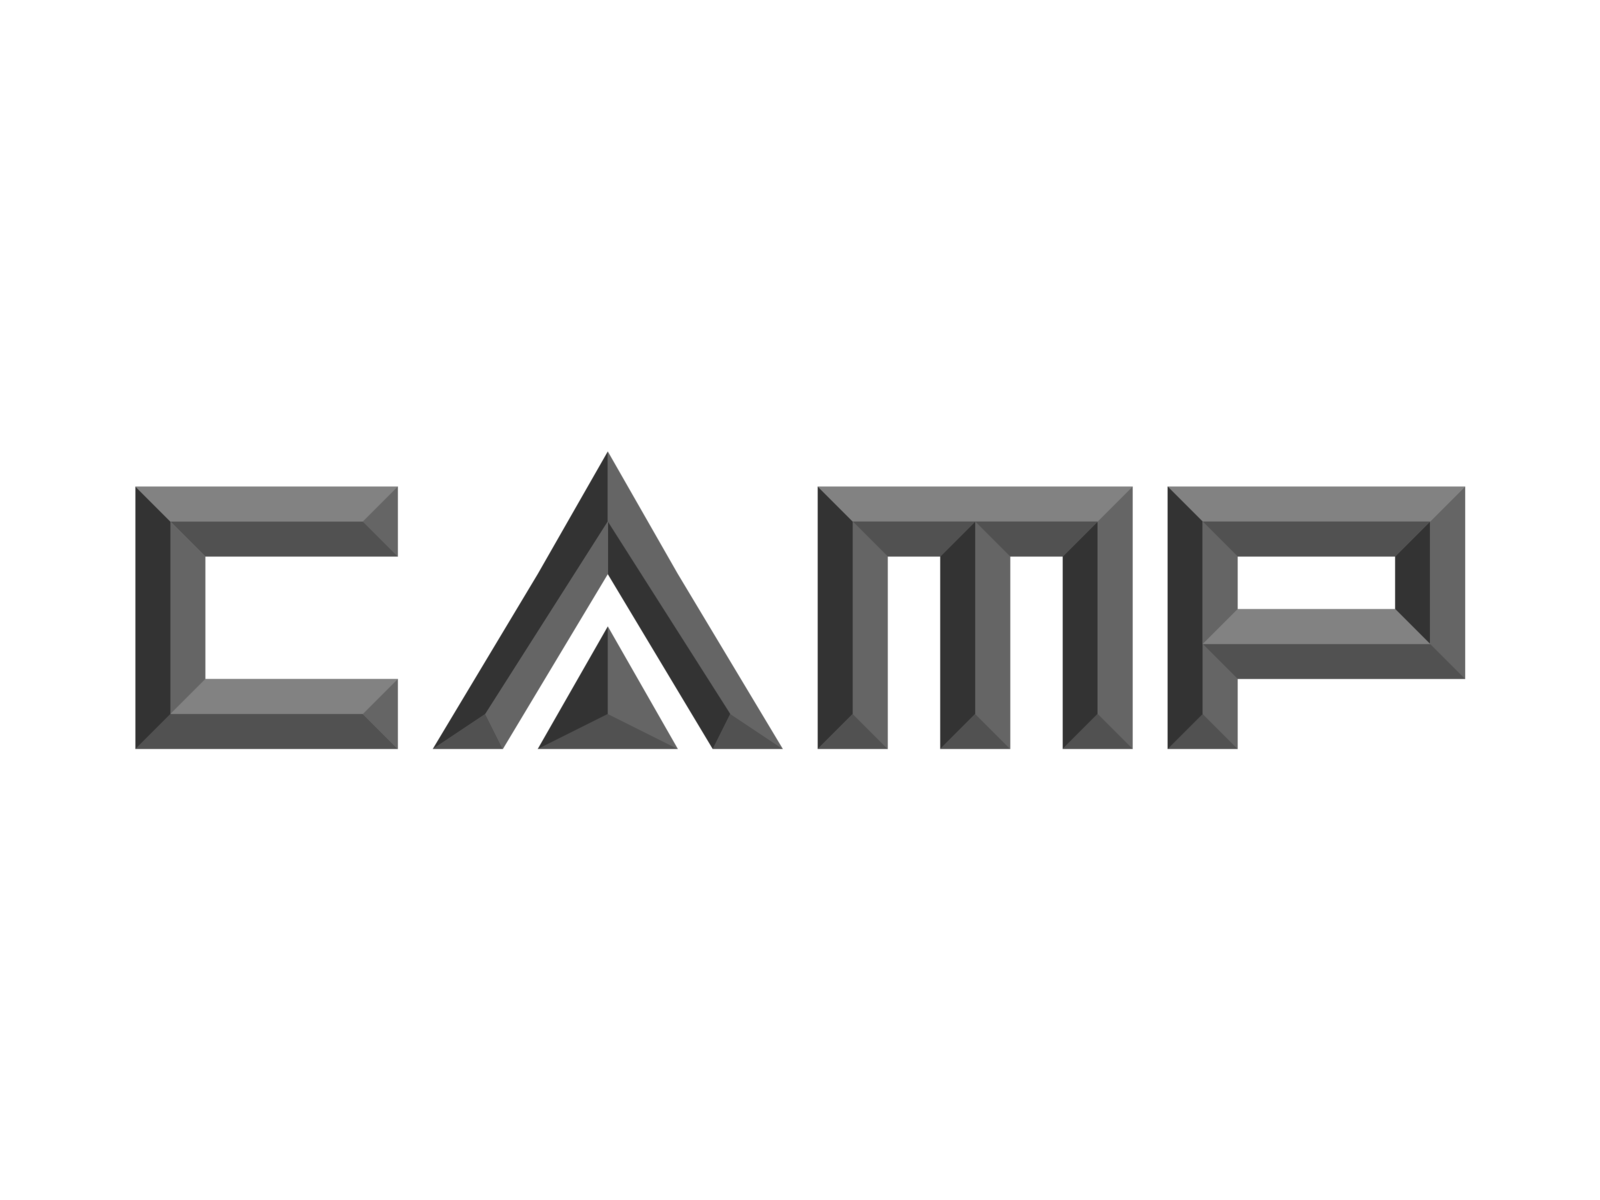 Camp by Mikael Finér on Dribbble